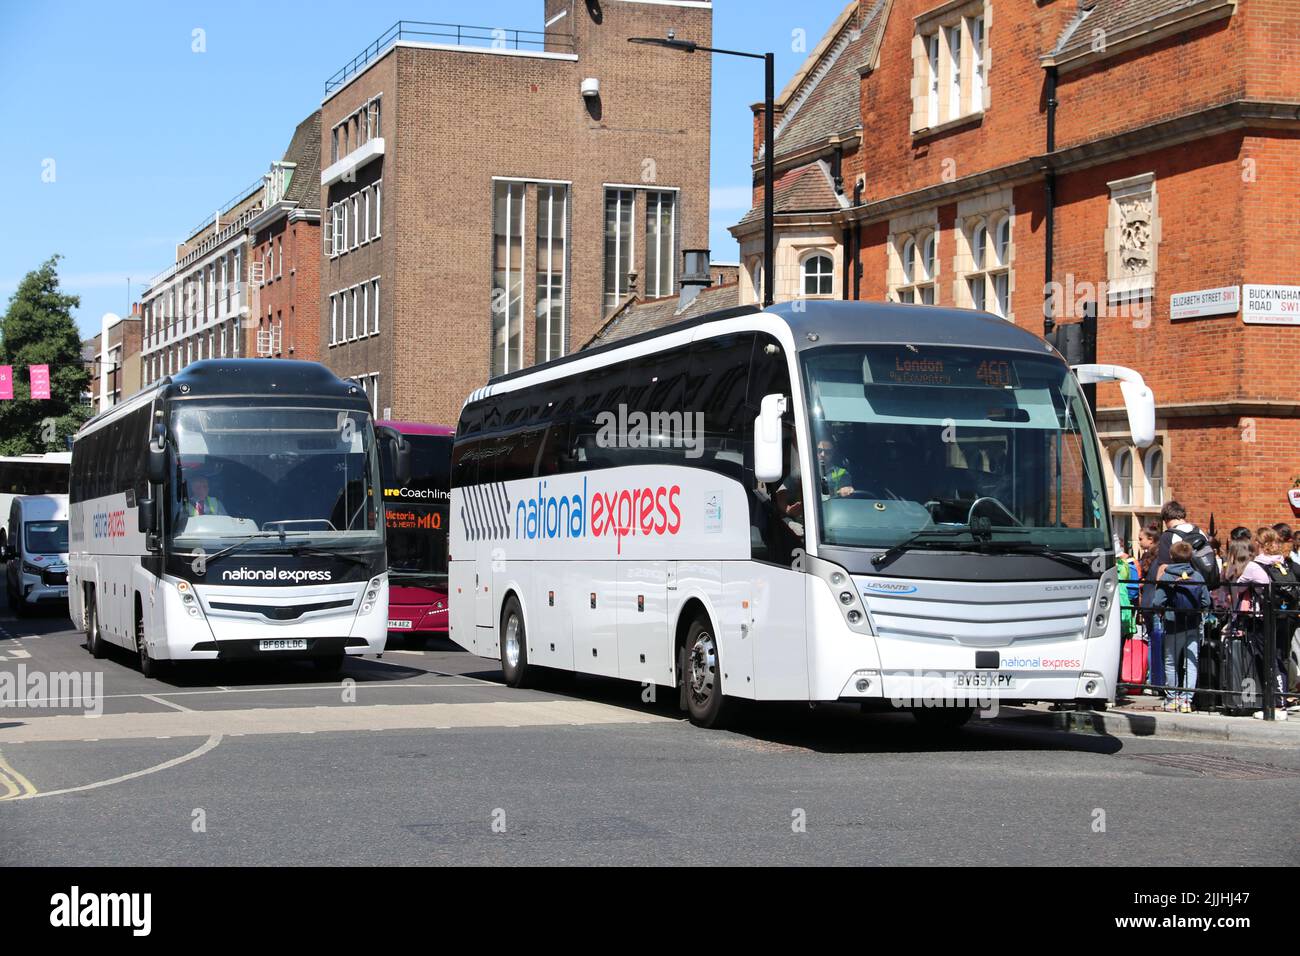 TWO NATIONAL EXPRESS COACHES IN LONDON Stock Photo